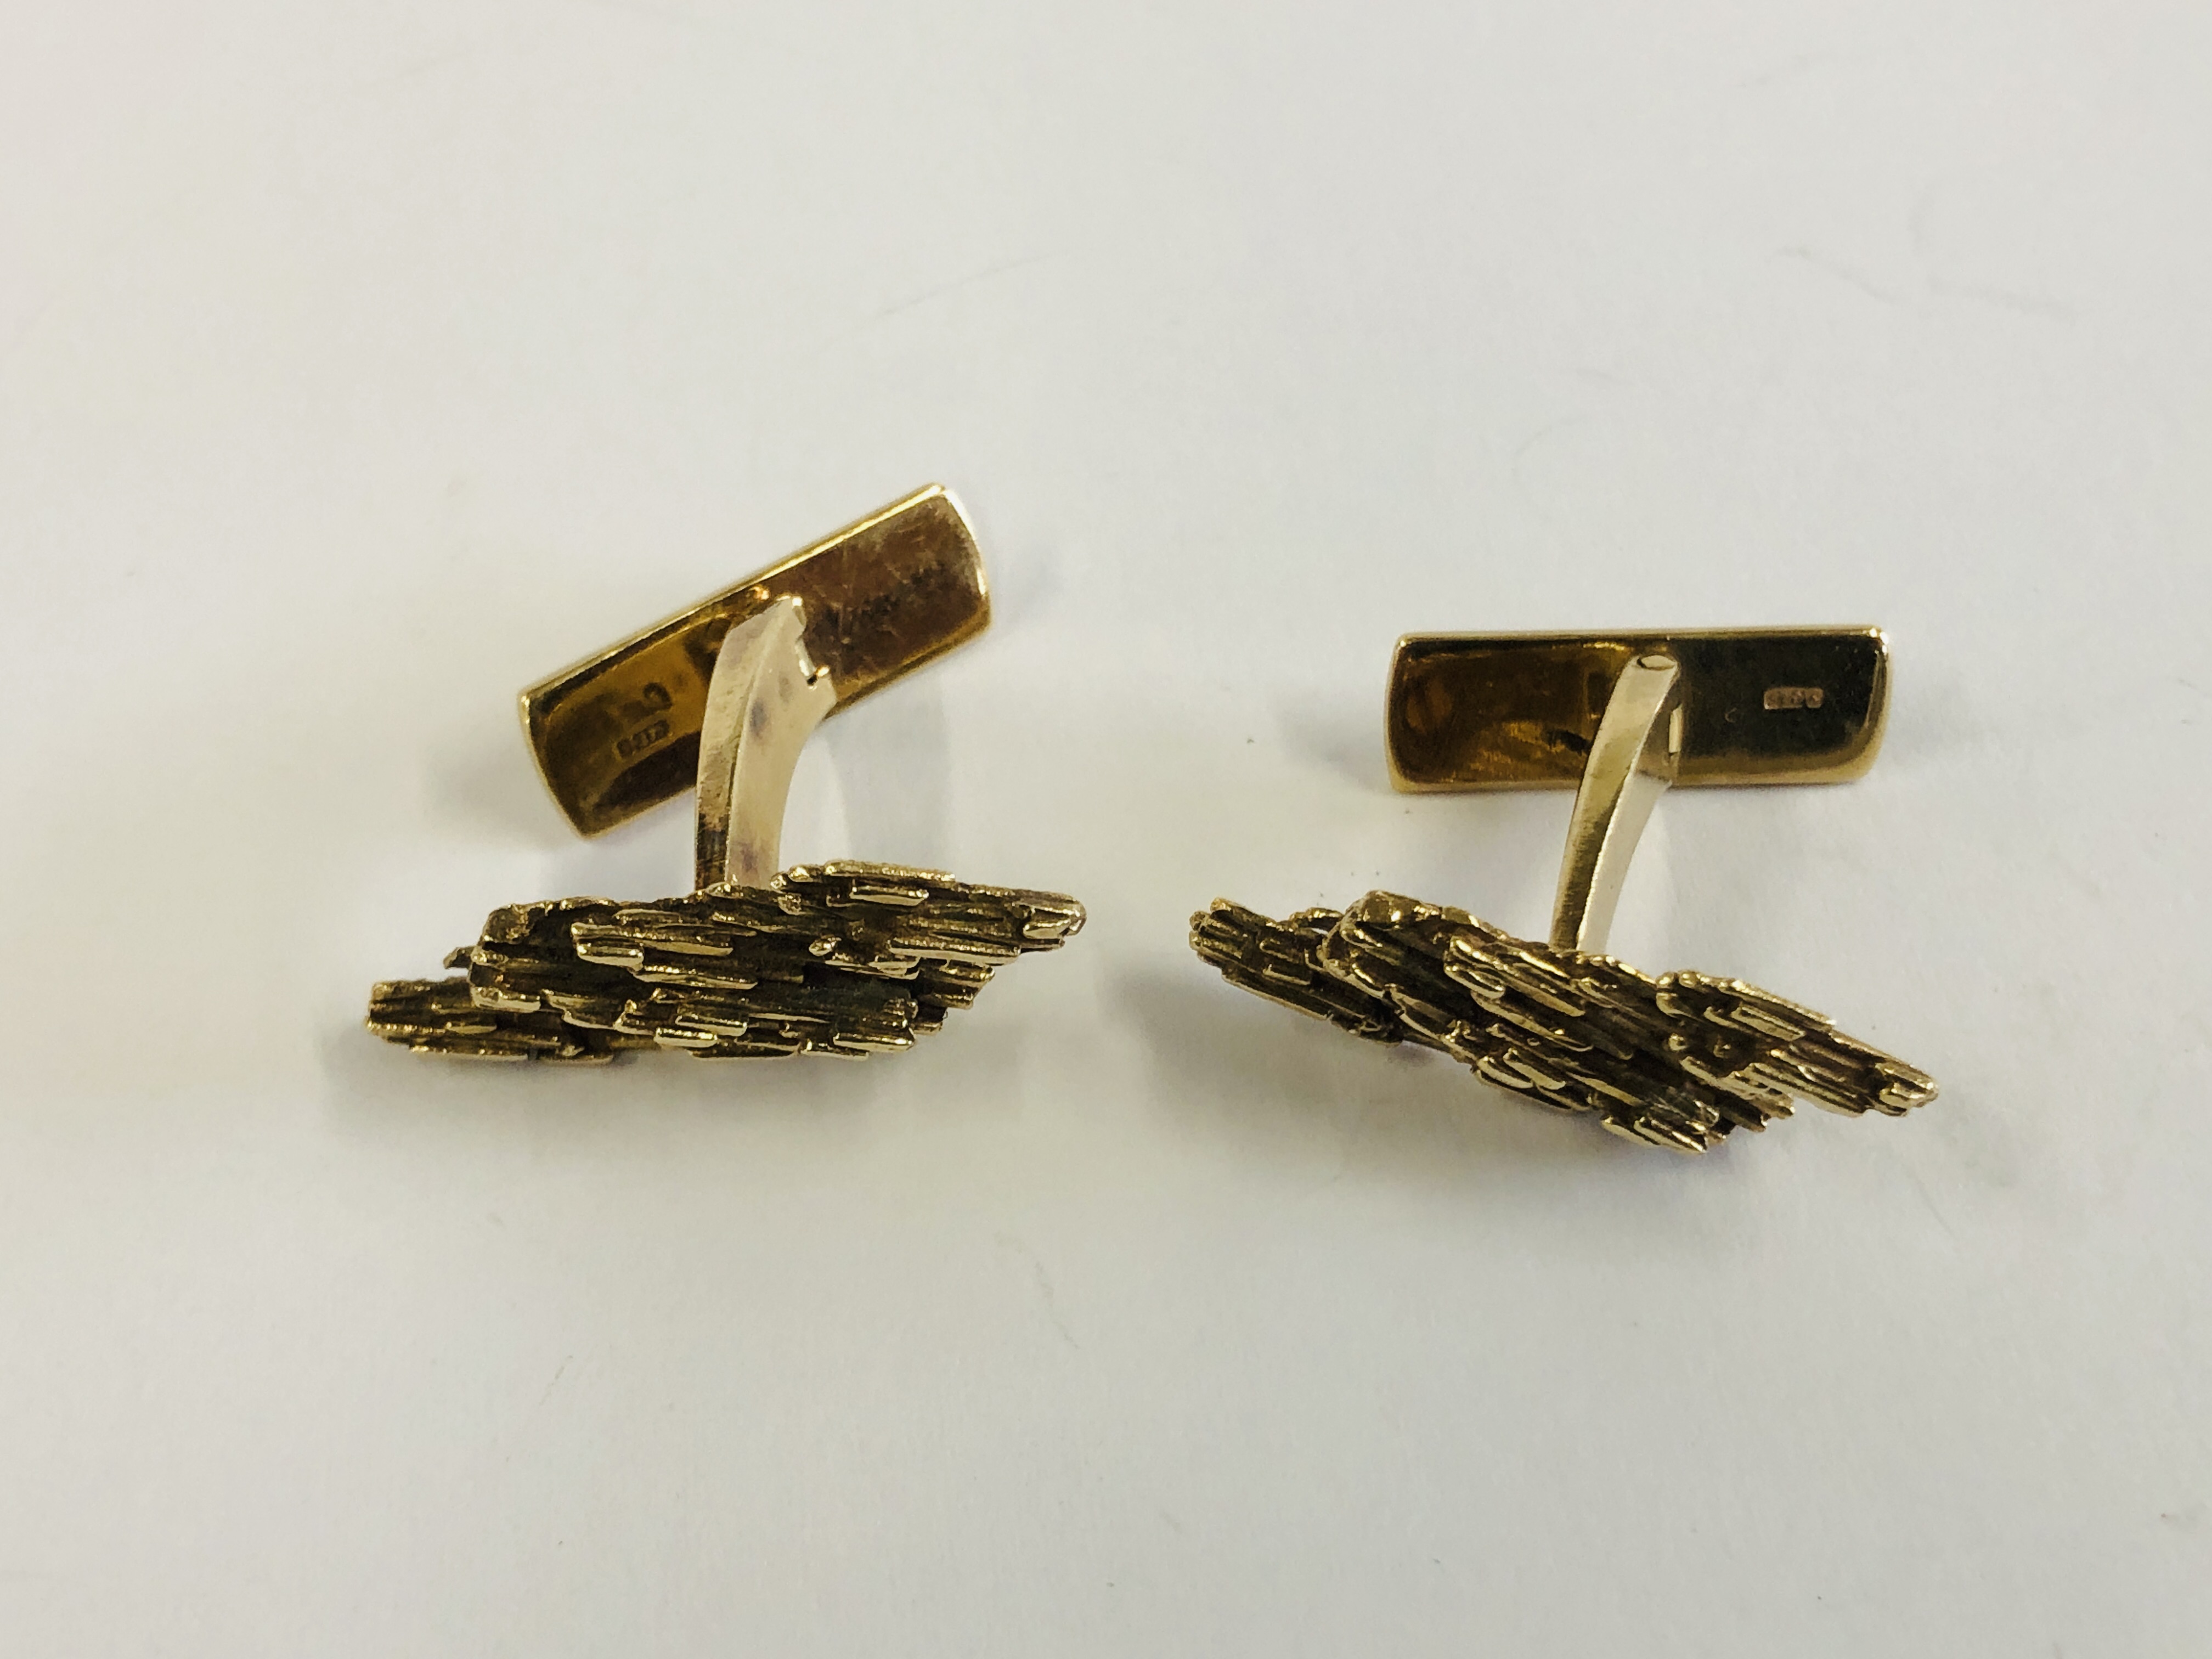 A PAIR OF 9CT GOLD CUFF LINKS OF BARK DESIGN BY C J LTD. - Image 2 of 6